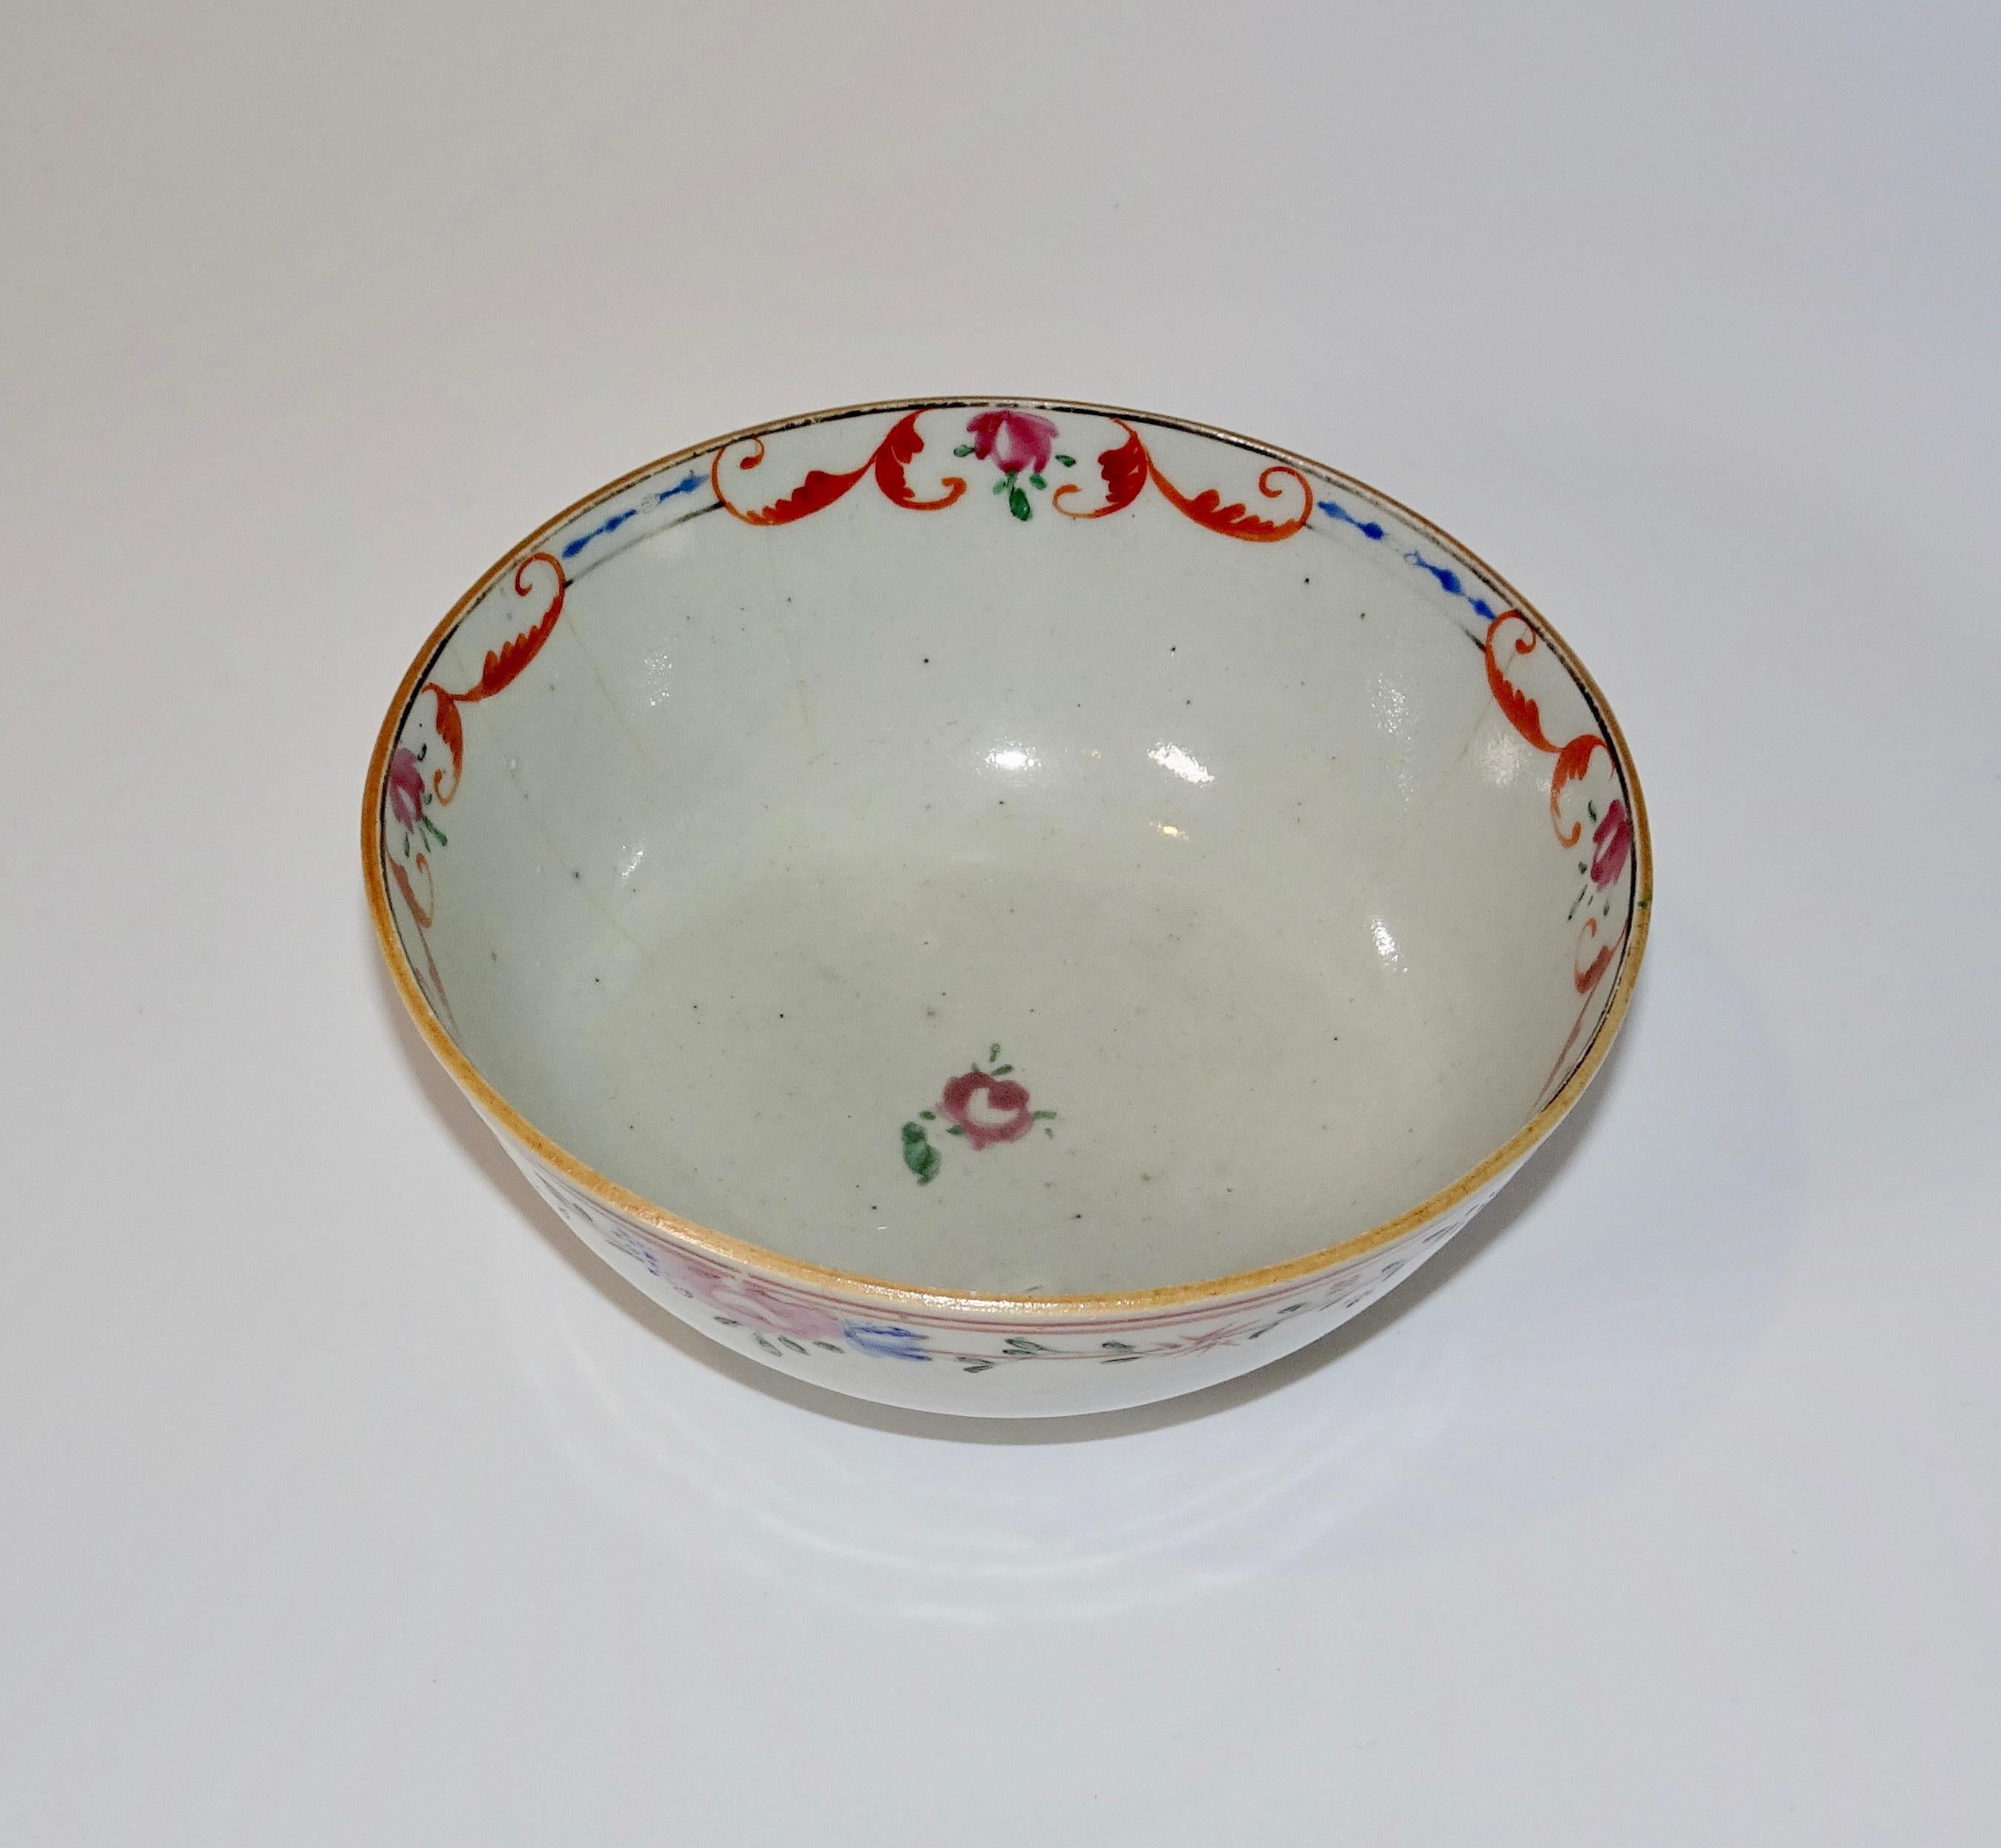 19th Century Chinese Porcelain Export Bowl with Floral Decoration In Good Condition For Sale In Nashville, TN